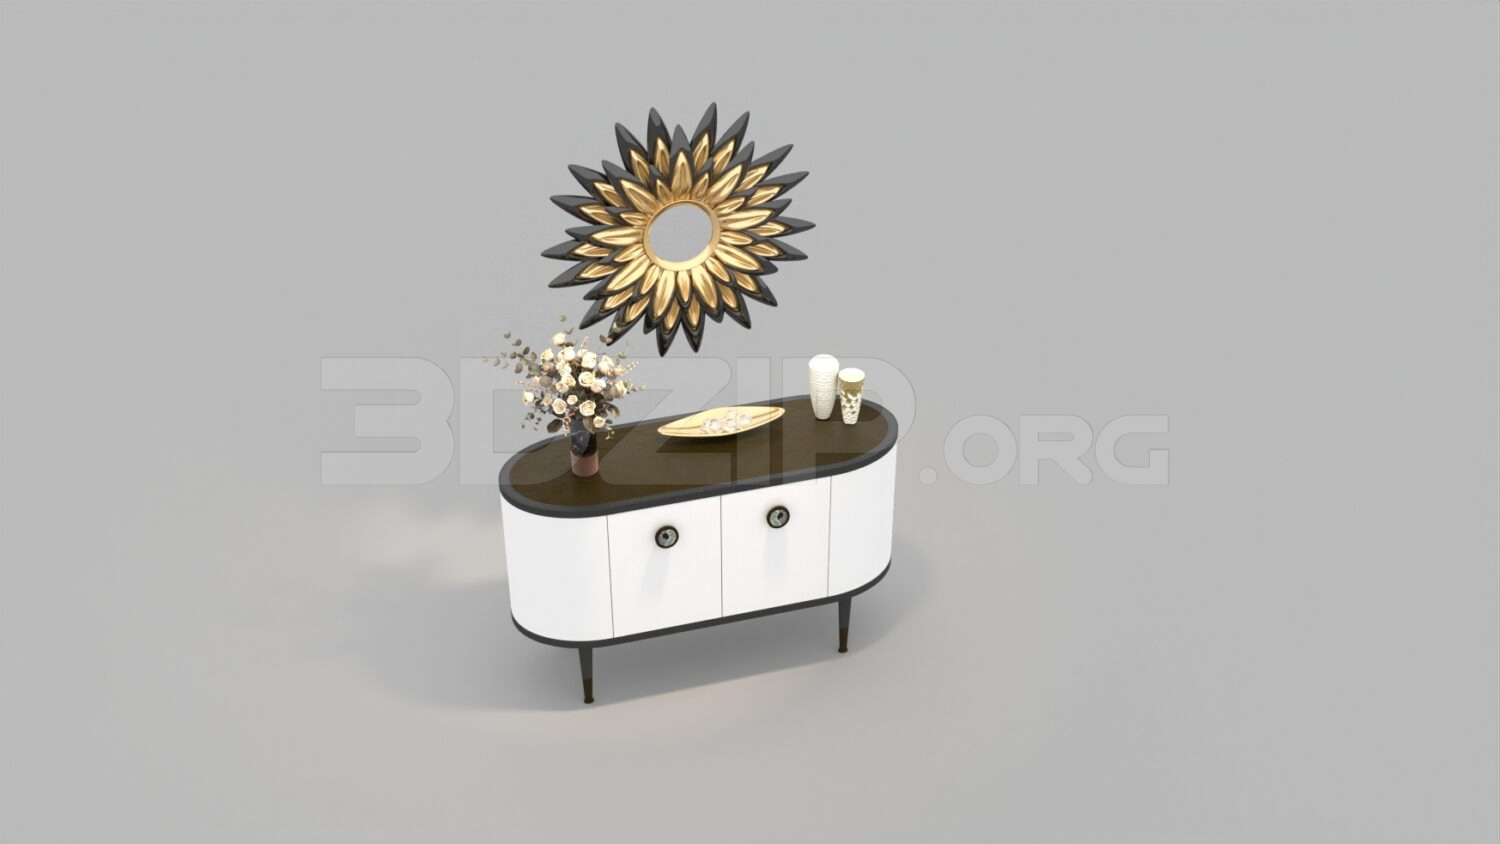 2481. Download Free Dressing Table Model By Tran Trung Hieu